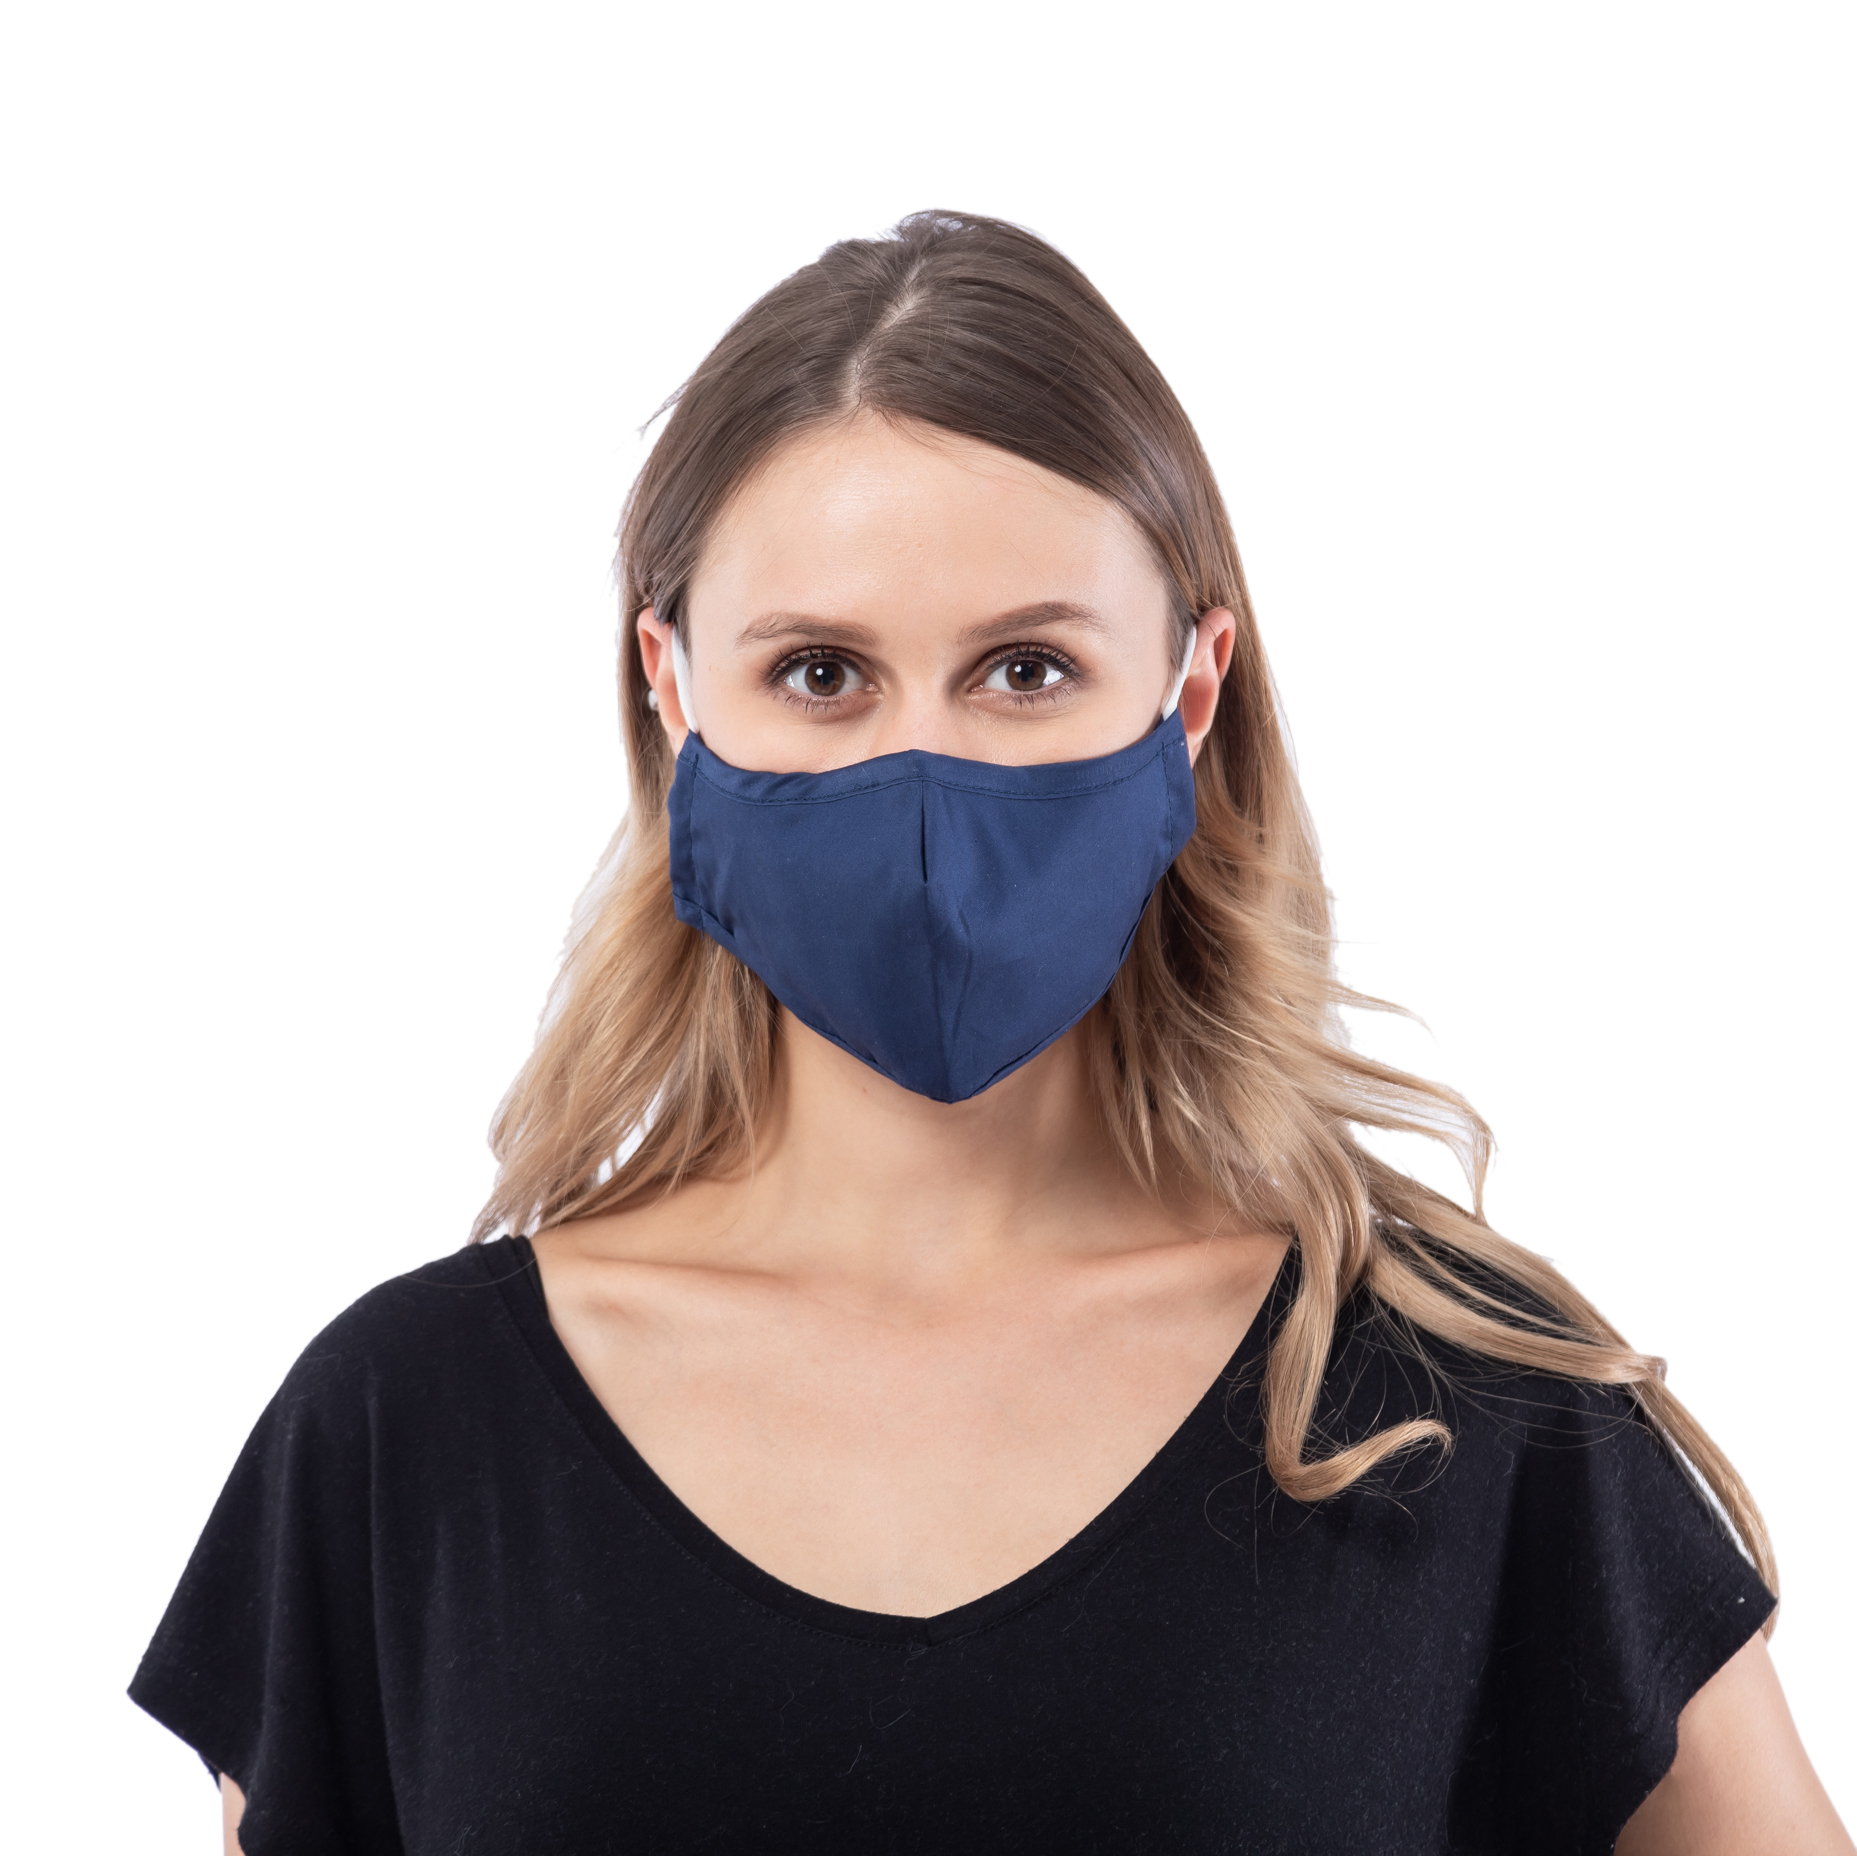 Adult 4-Layer Cotton Mask - Includes 1 Replaceable PM2.5 Filter and Adjustable Ear Straps - NAVY